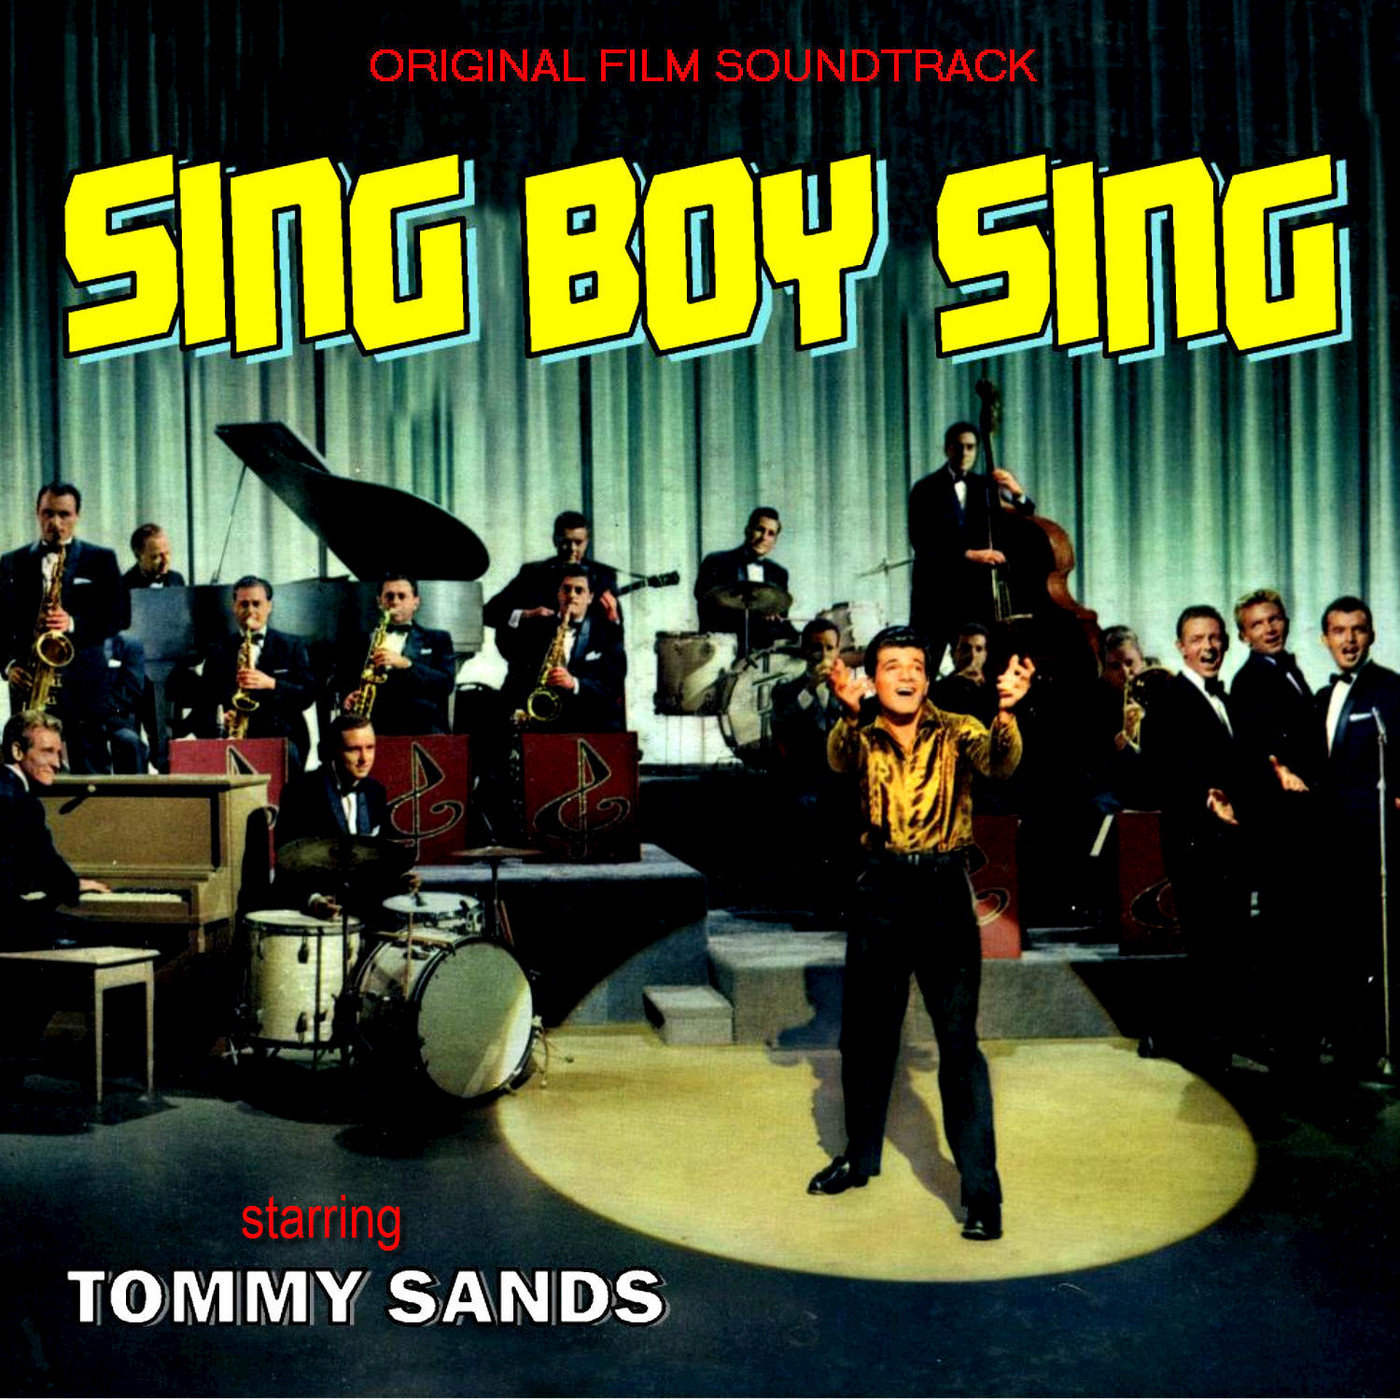 Sing soundtrack. OST "Tommy (2cd)". You like Sing boys don't you.